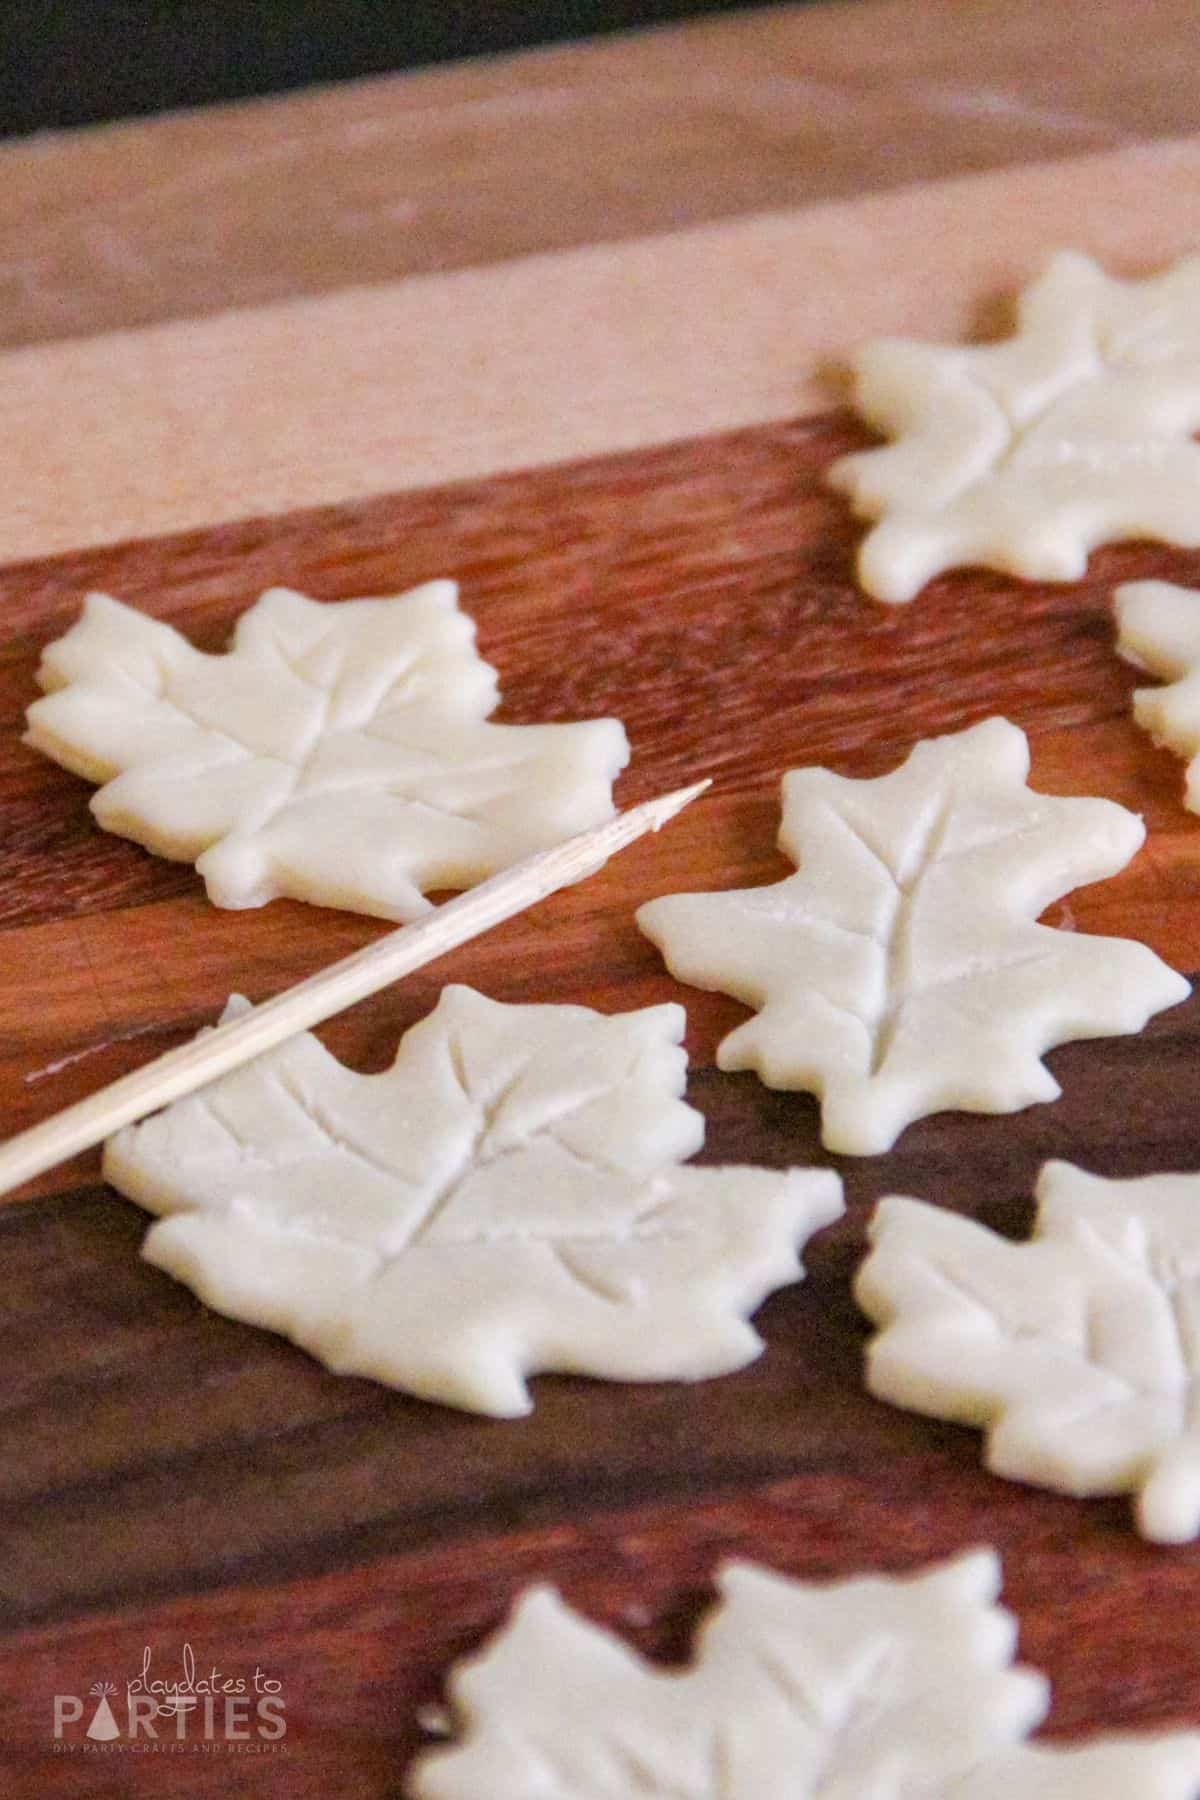 Leaf shaped pie crusts on a cutting board with a wooden skewer nearby.